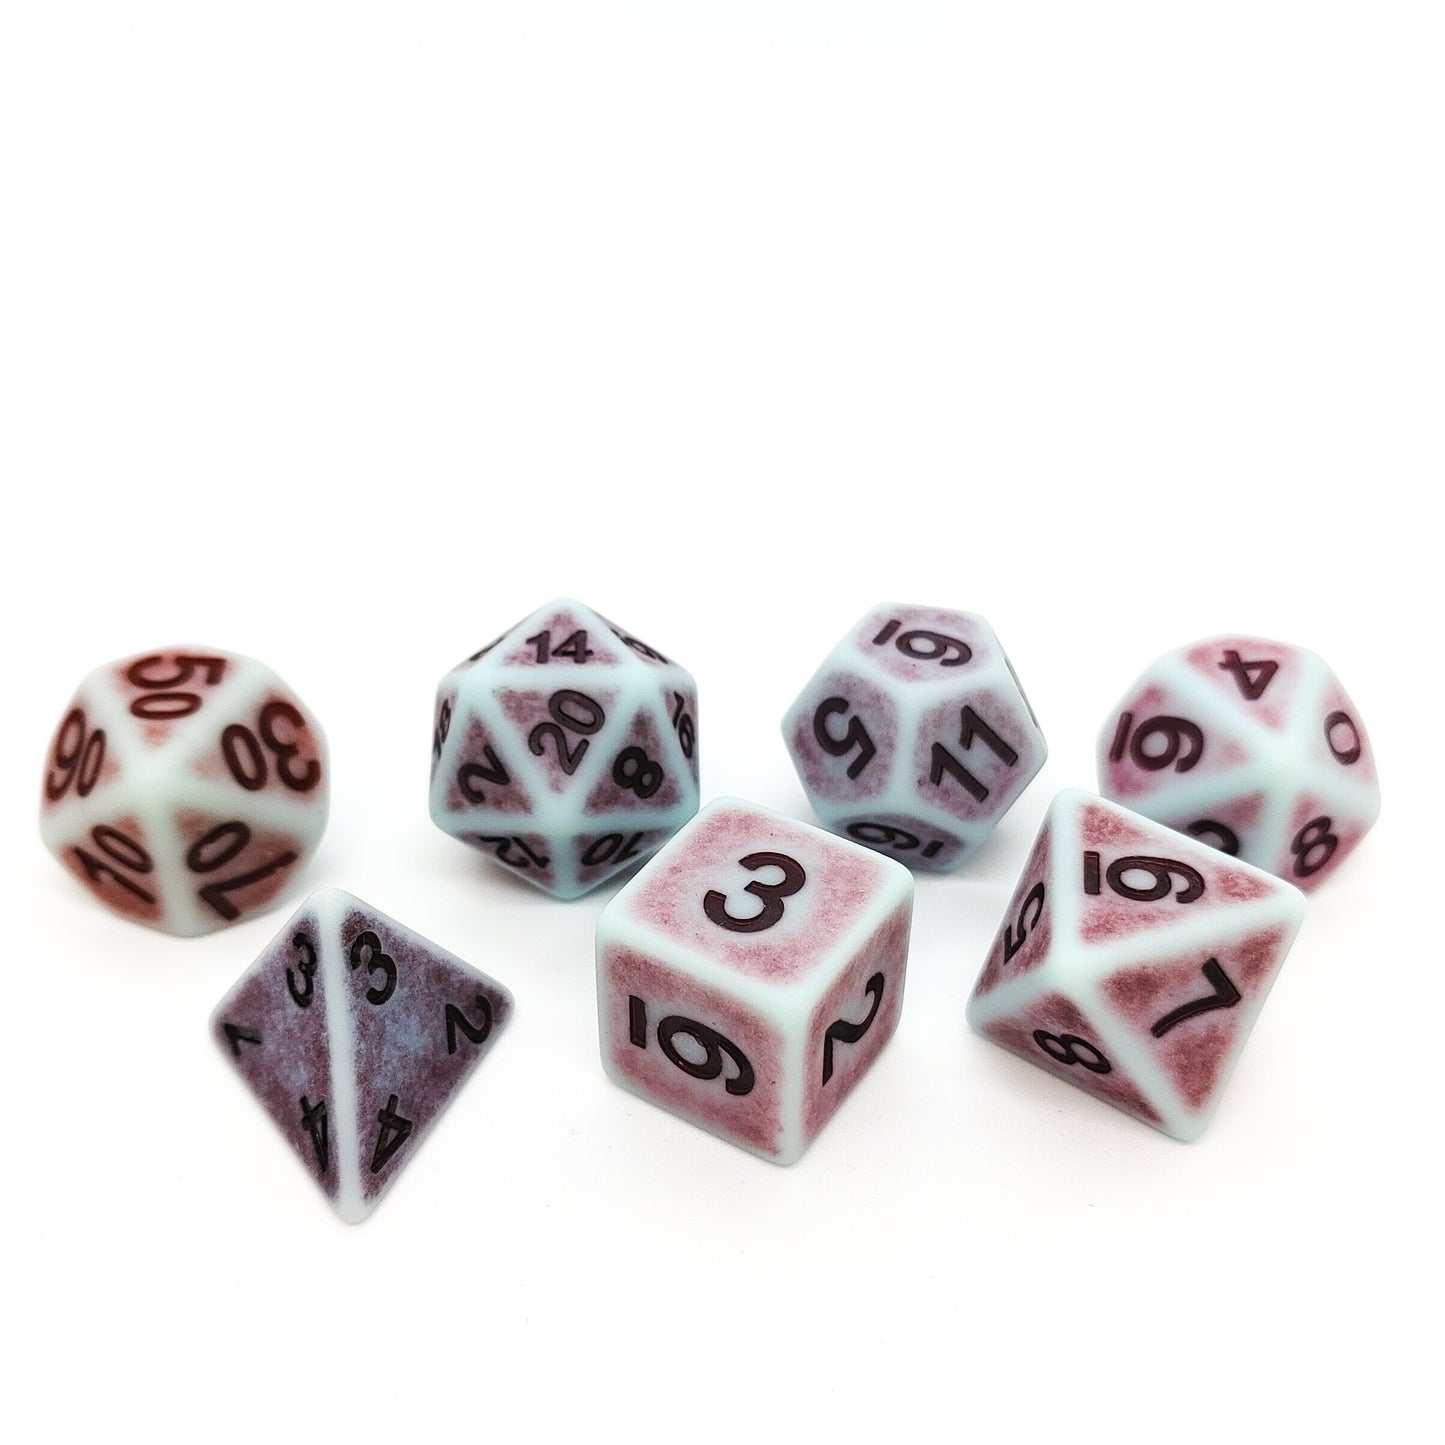 Ancient Turquoise and Purple dice set - 7 piece RPG dice set